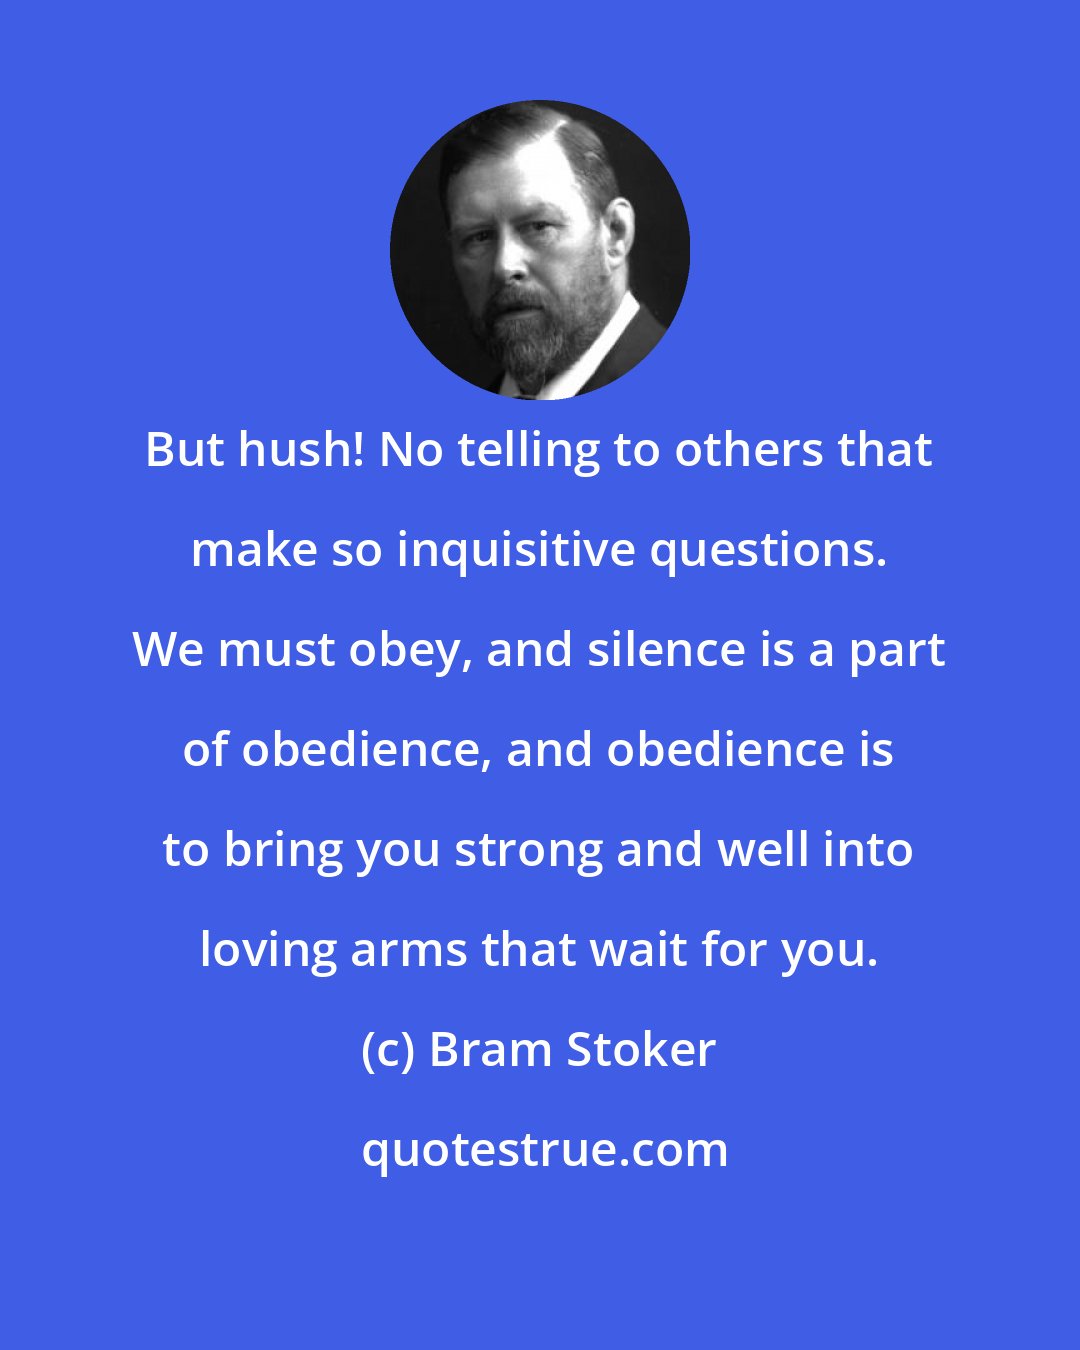 Bram Stoker: But hush! No telling to others that make so inquisitive questions. We must obey, and silence is a part of obedience, and obedience is to bring you strong and well into loving arms that wait for you.